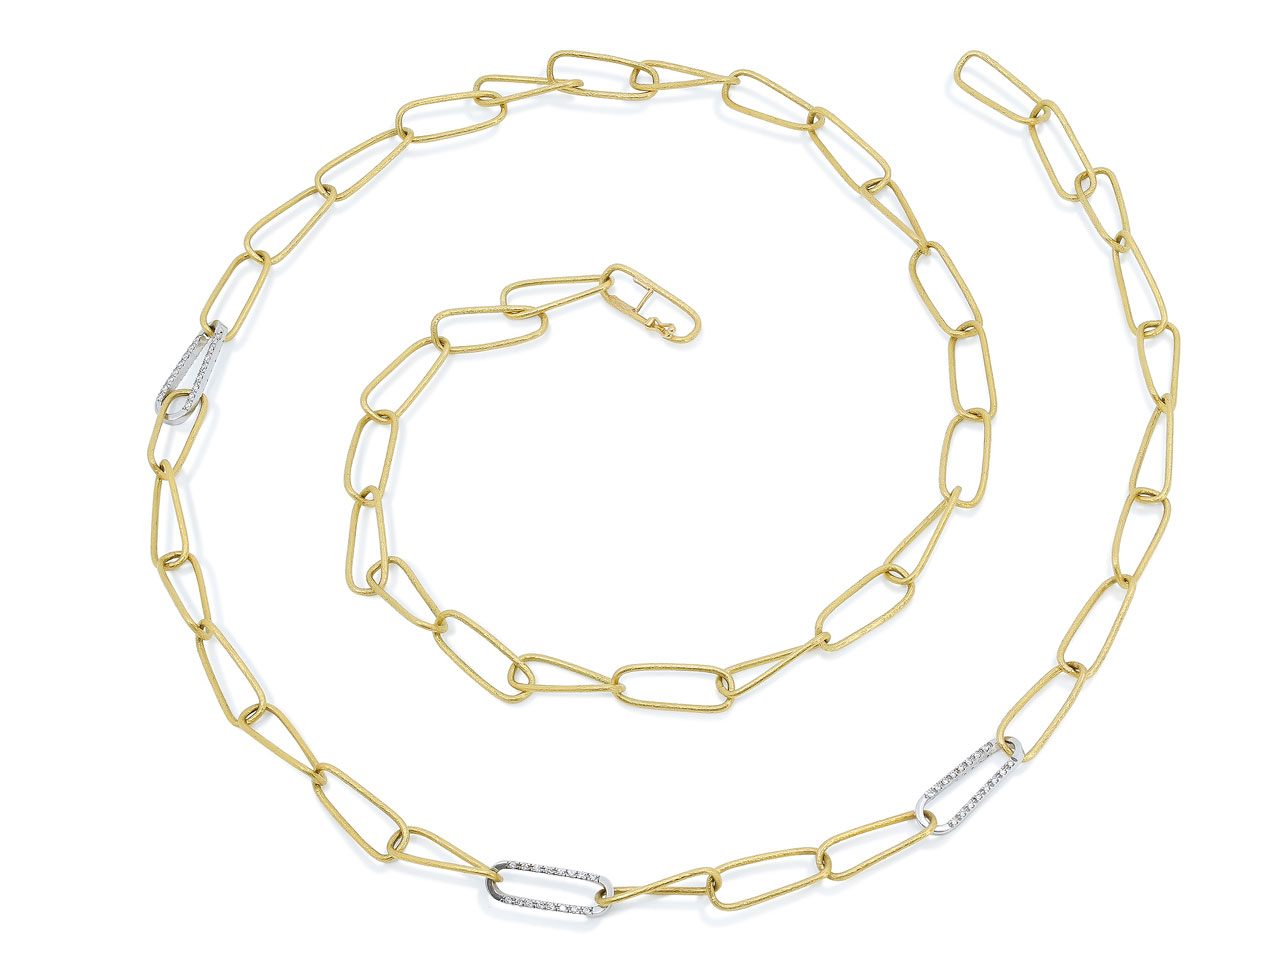 Marchisio Gold Link Necklace in 18K Gold